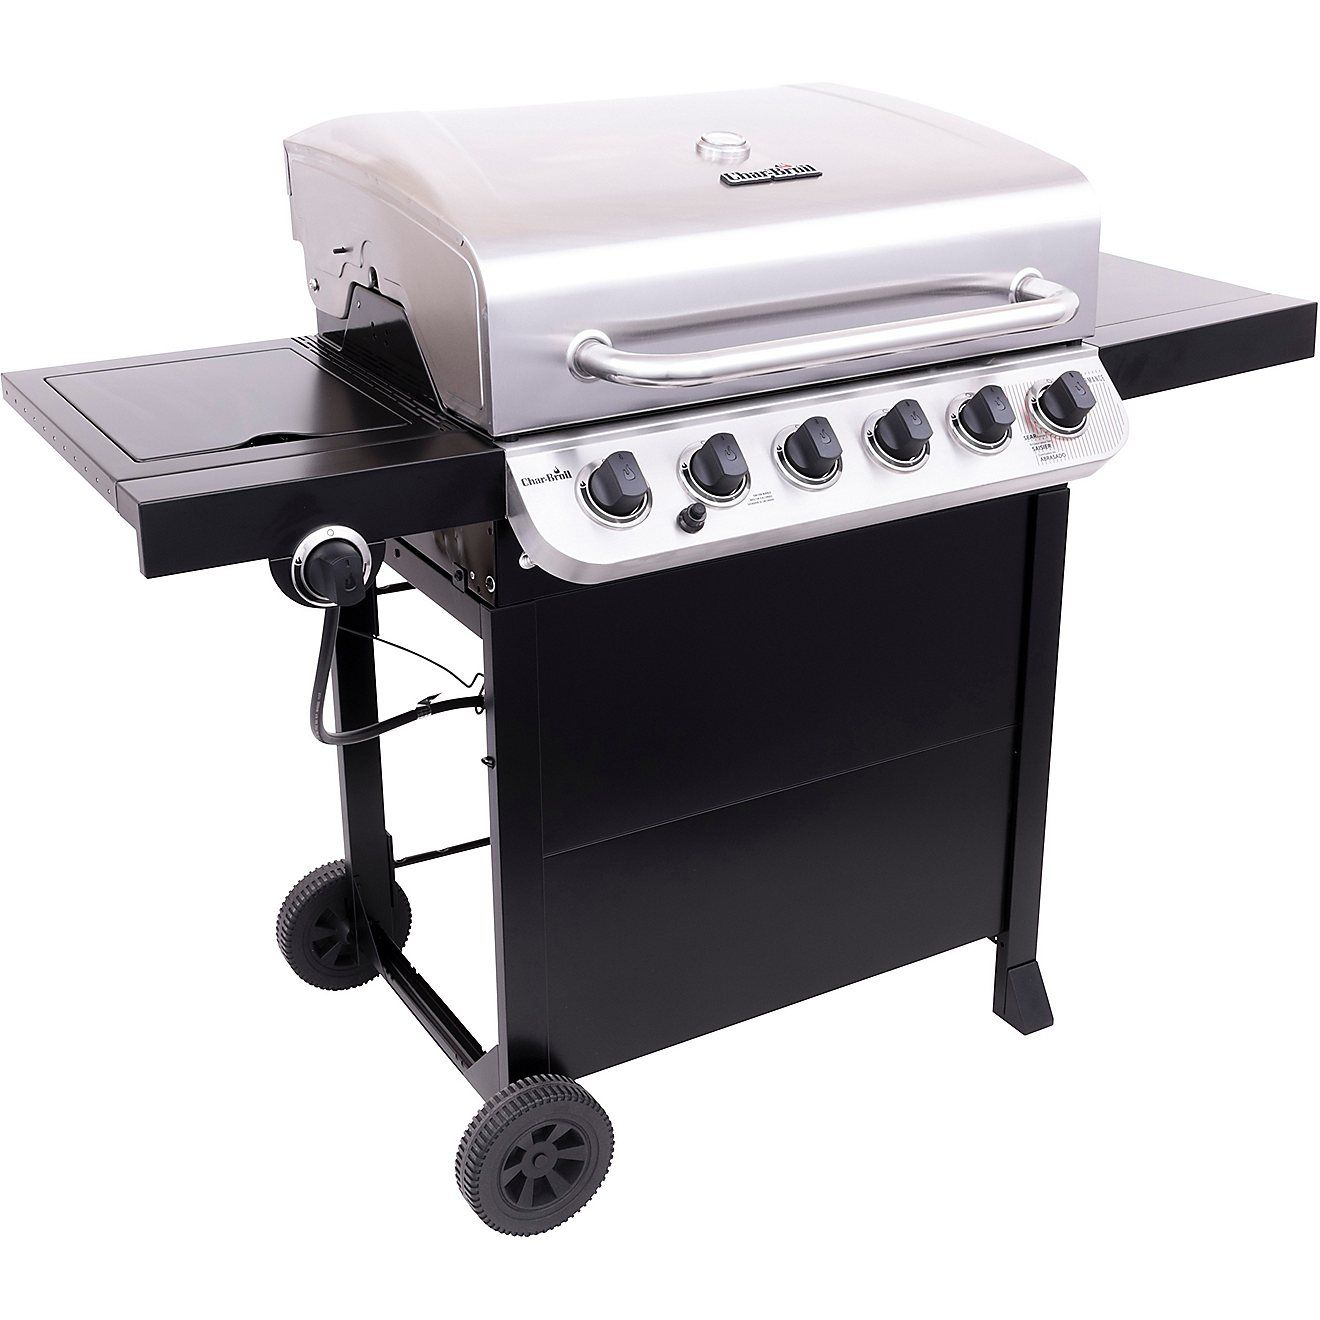 Char-Broil Performance Series 6-Burner Gas Grill | Academy | Academy Sports + Outdoors